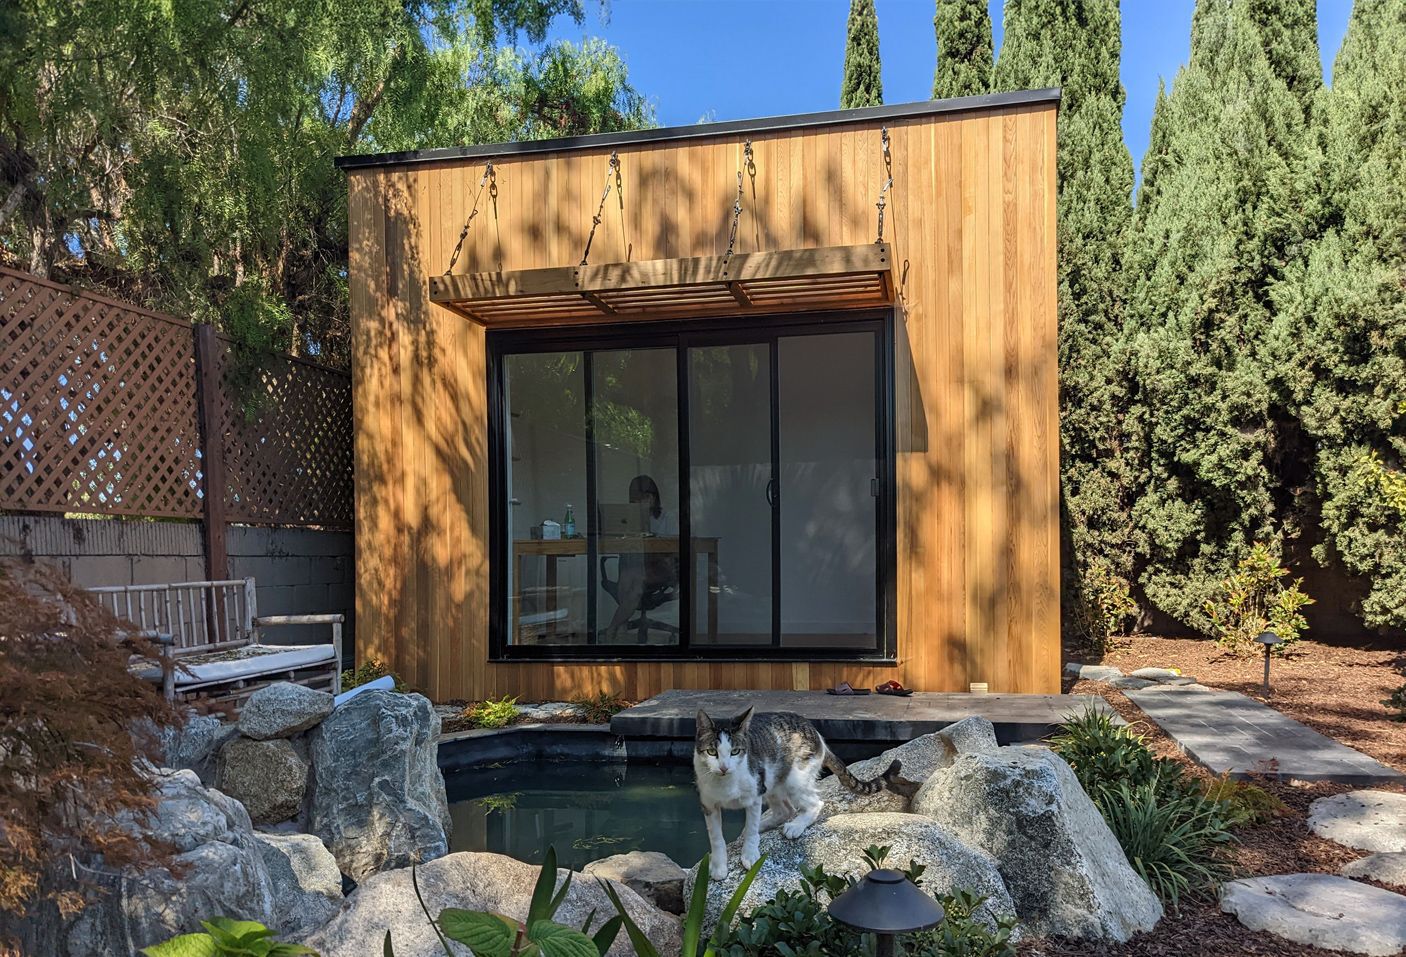 Front view of 8’x14' Quadra Home Studio located in Torrance, California – Summerwood Products